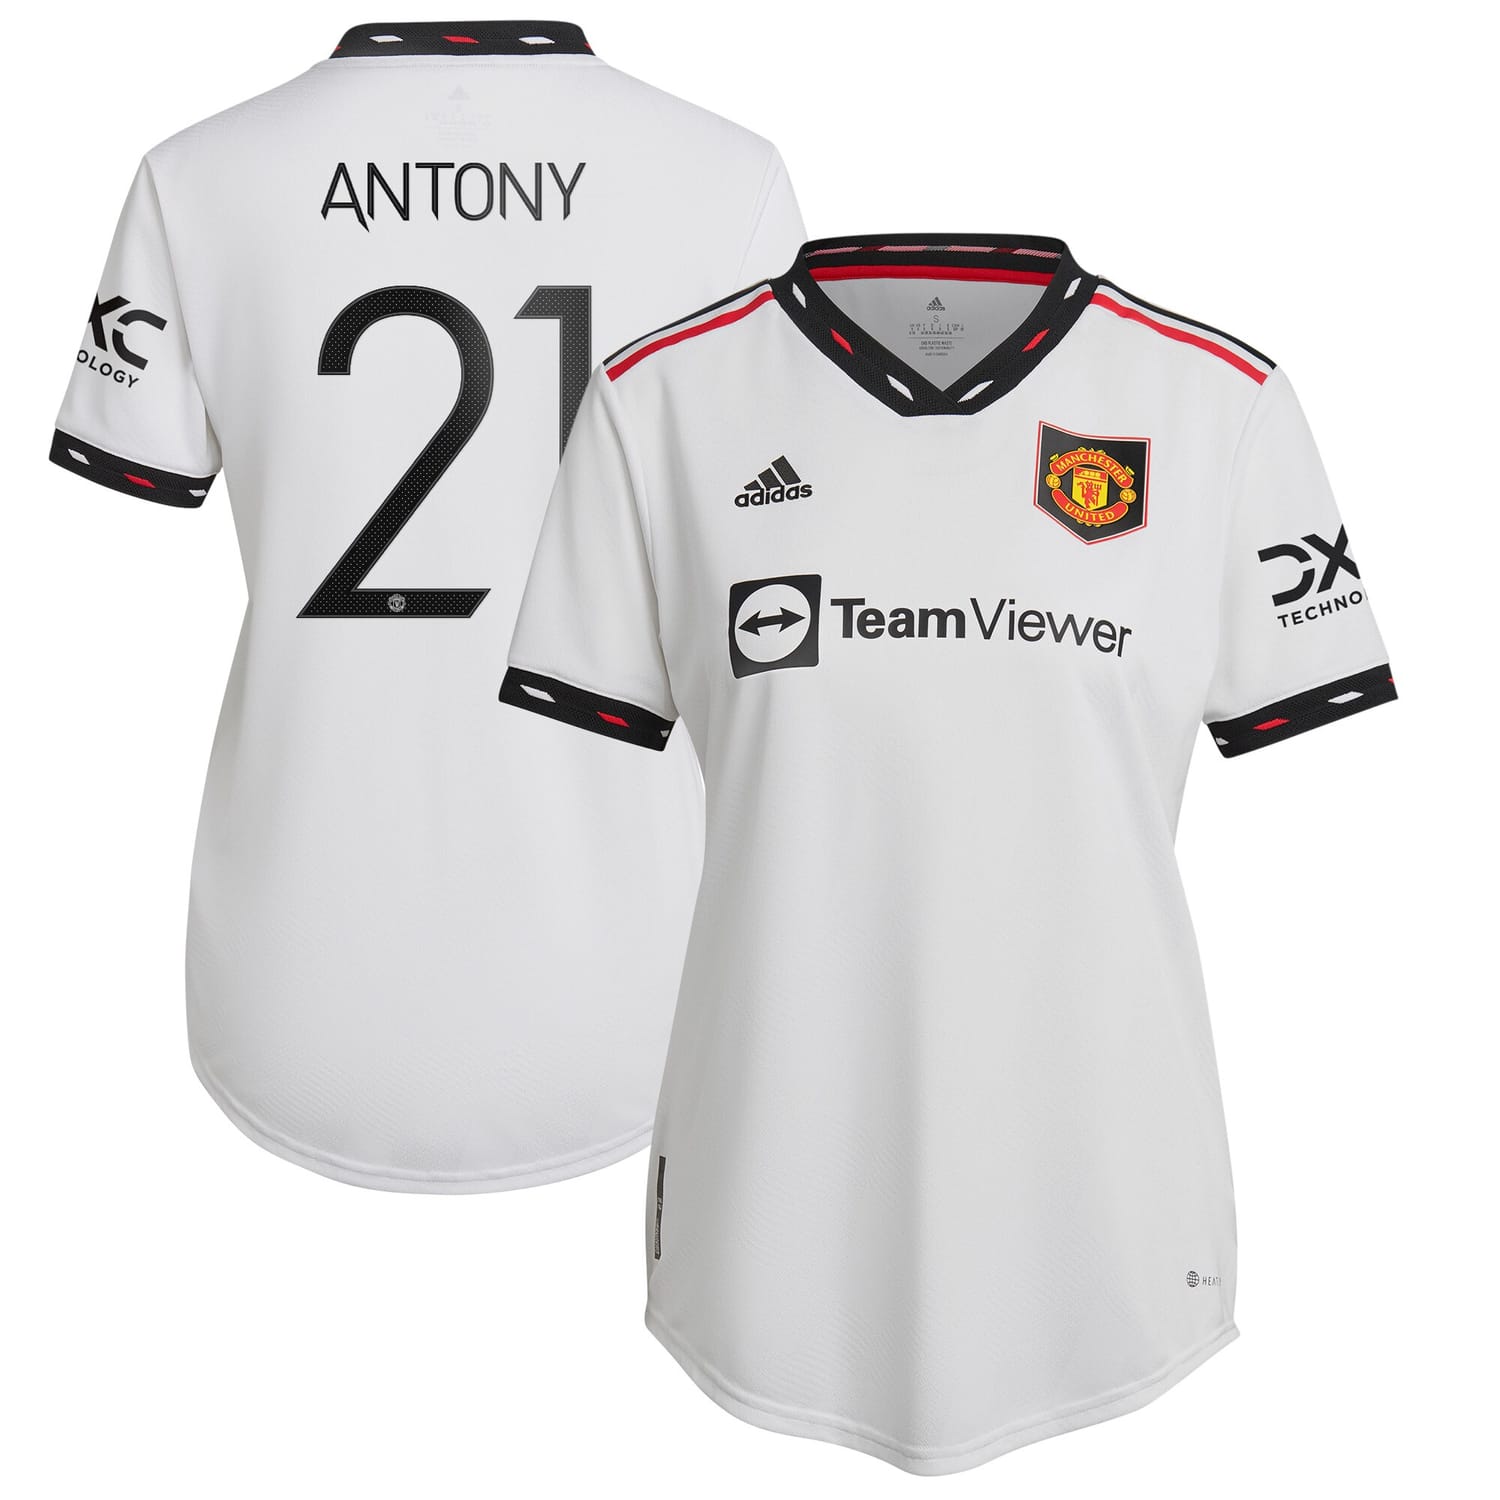 Premier League Manchester United Away Cup Authentic Jersey Shirt 2022-23 player Antony 21 printing for Women